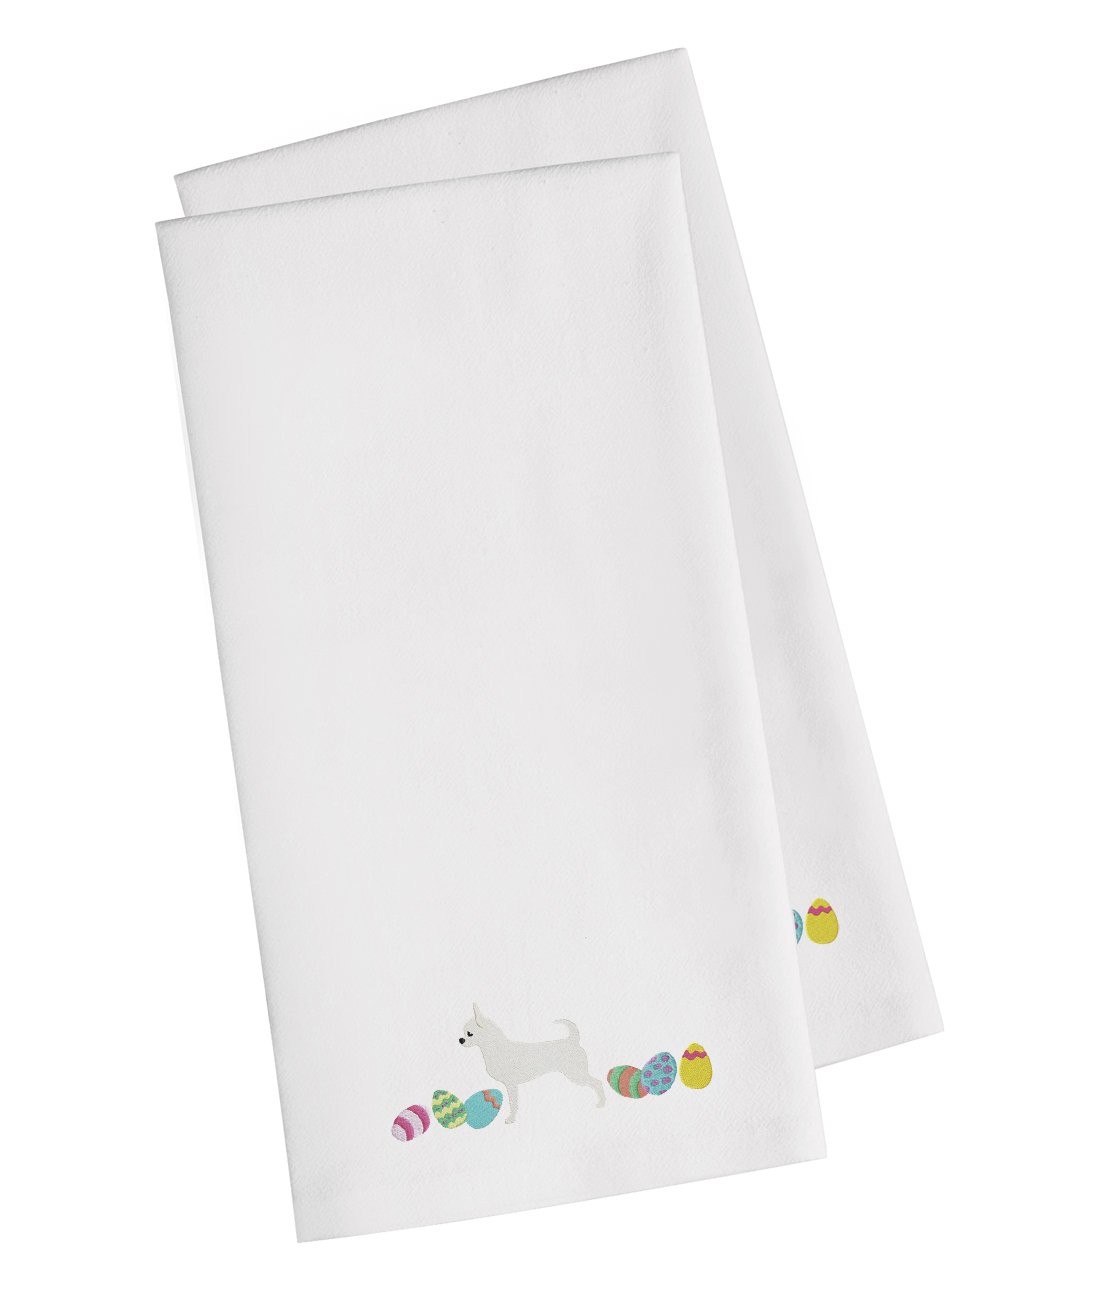 Chihuahua Easter White Embroidered Kitchen Towel Set of 2 CK1624WHTWE by Caroline's Treasures